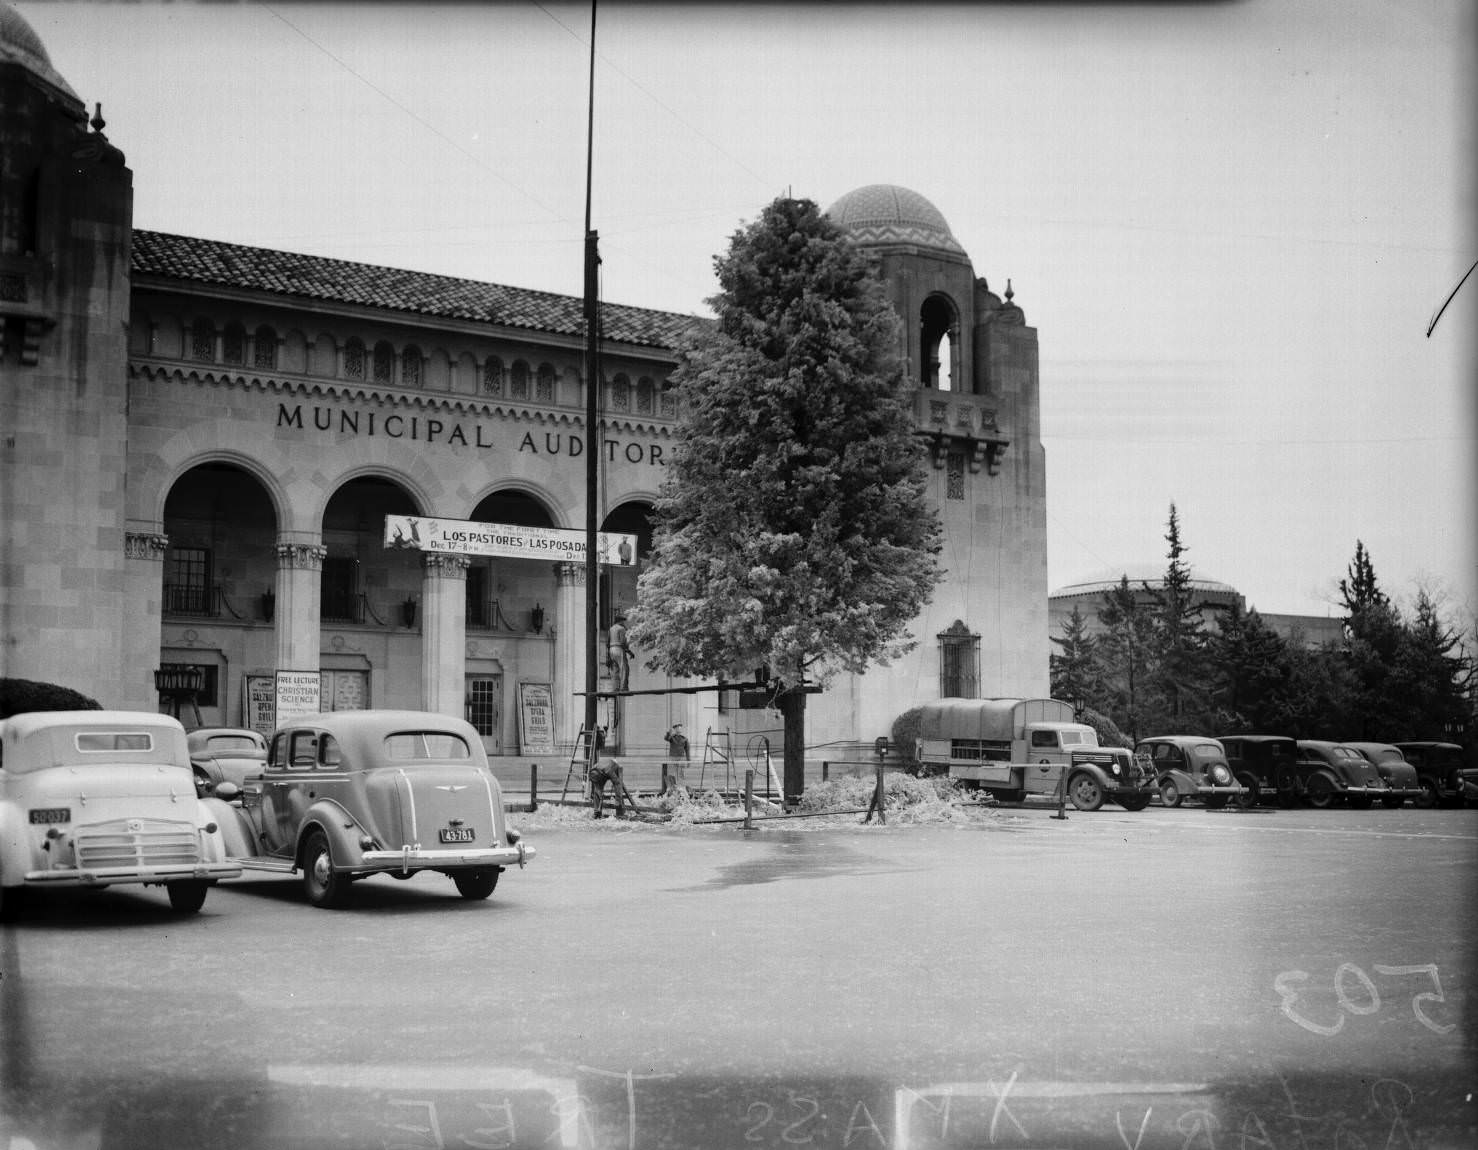 The front of the Municipal Auditorium showing the Rotarian Christmas tree, 1930